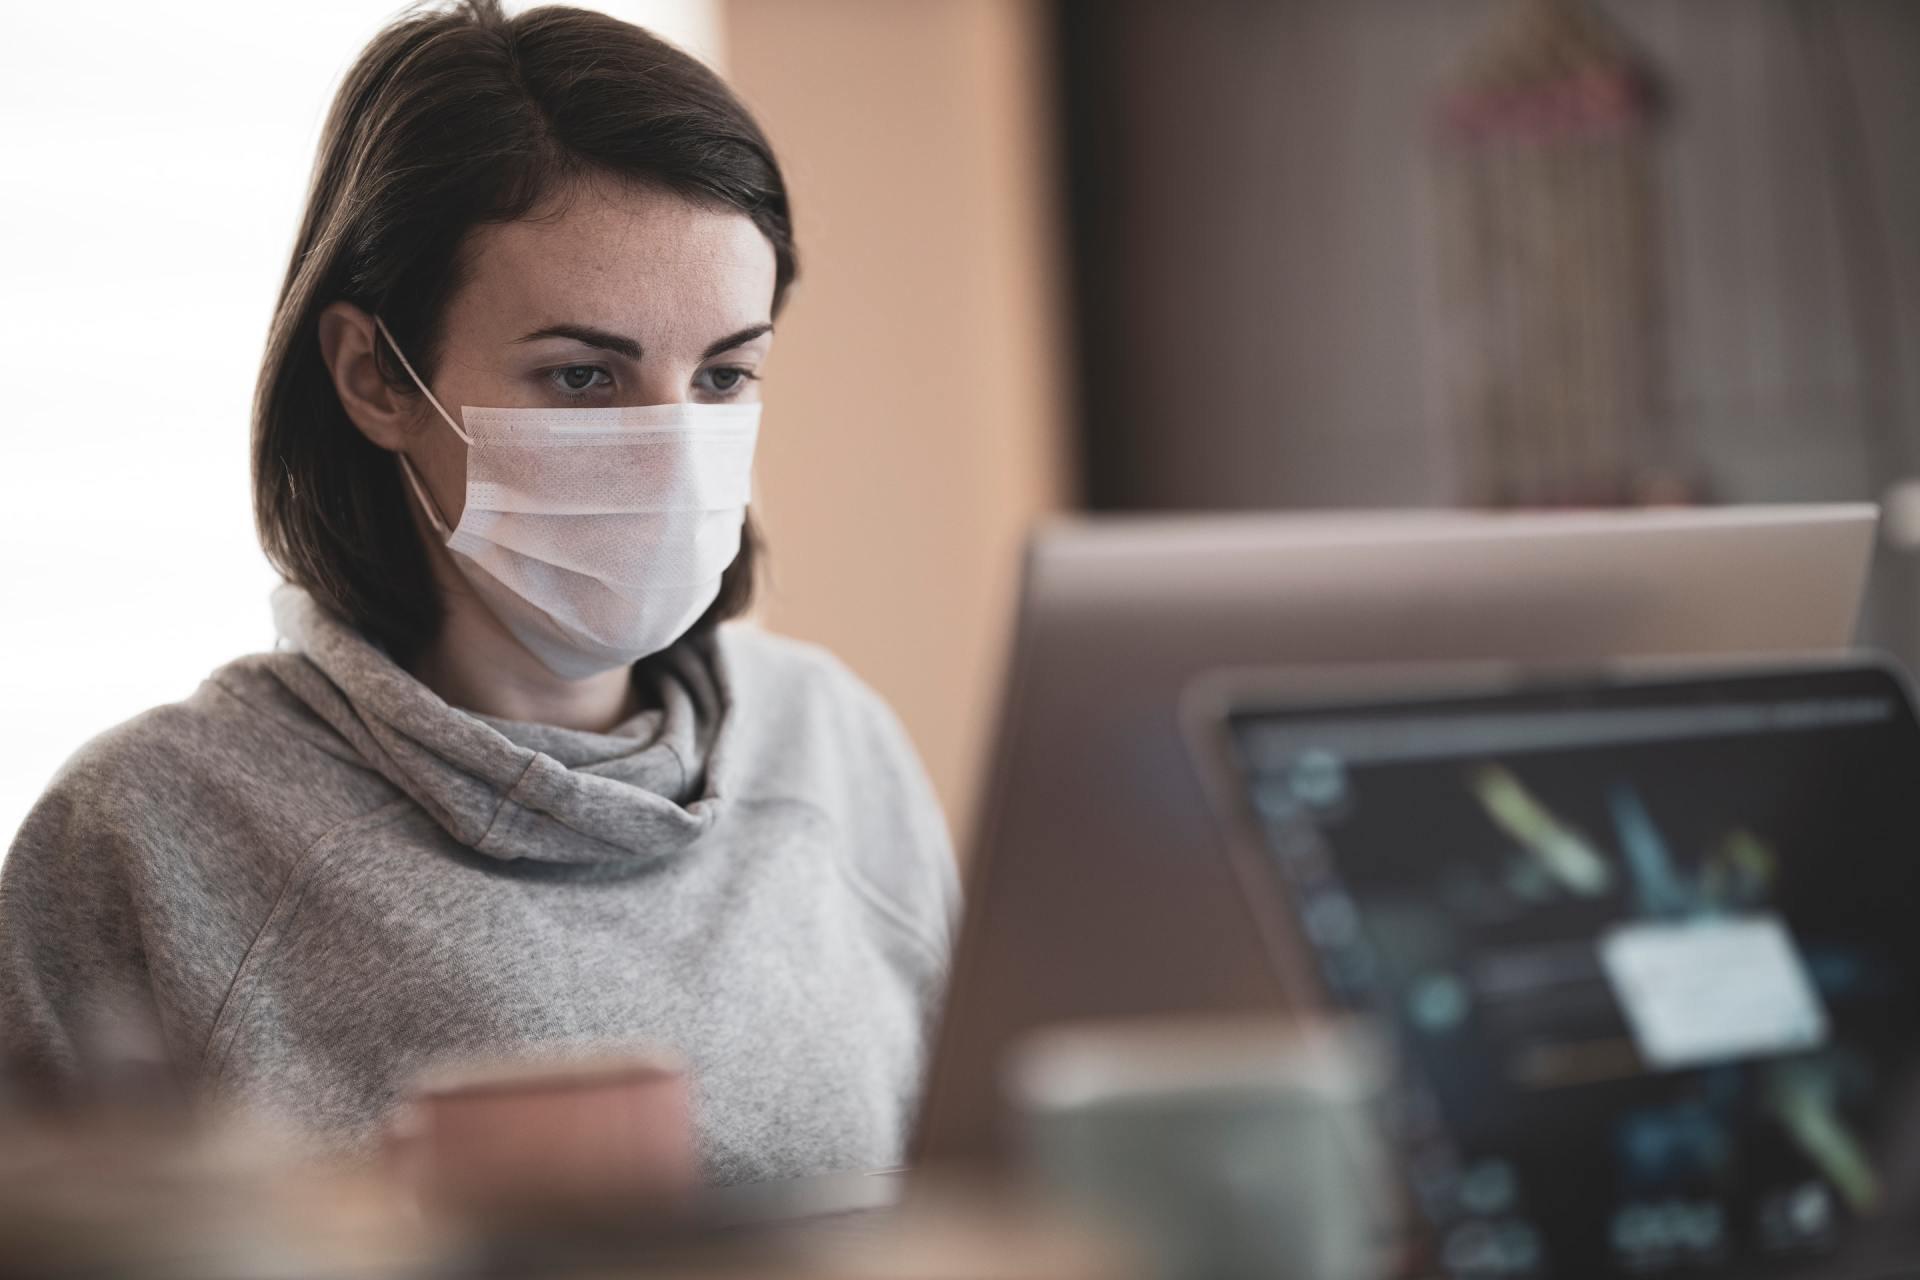 Relocating your office in a Pandemic